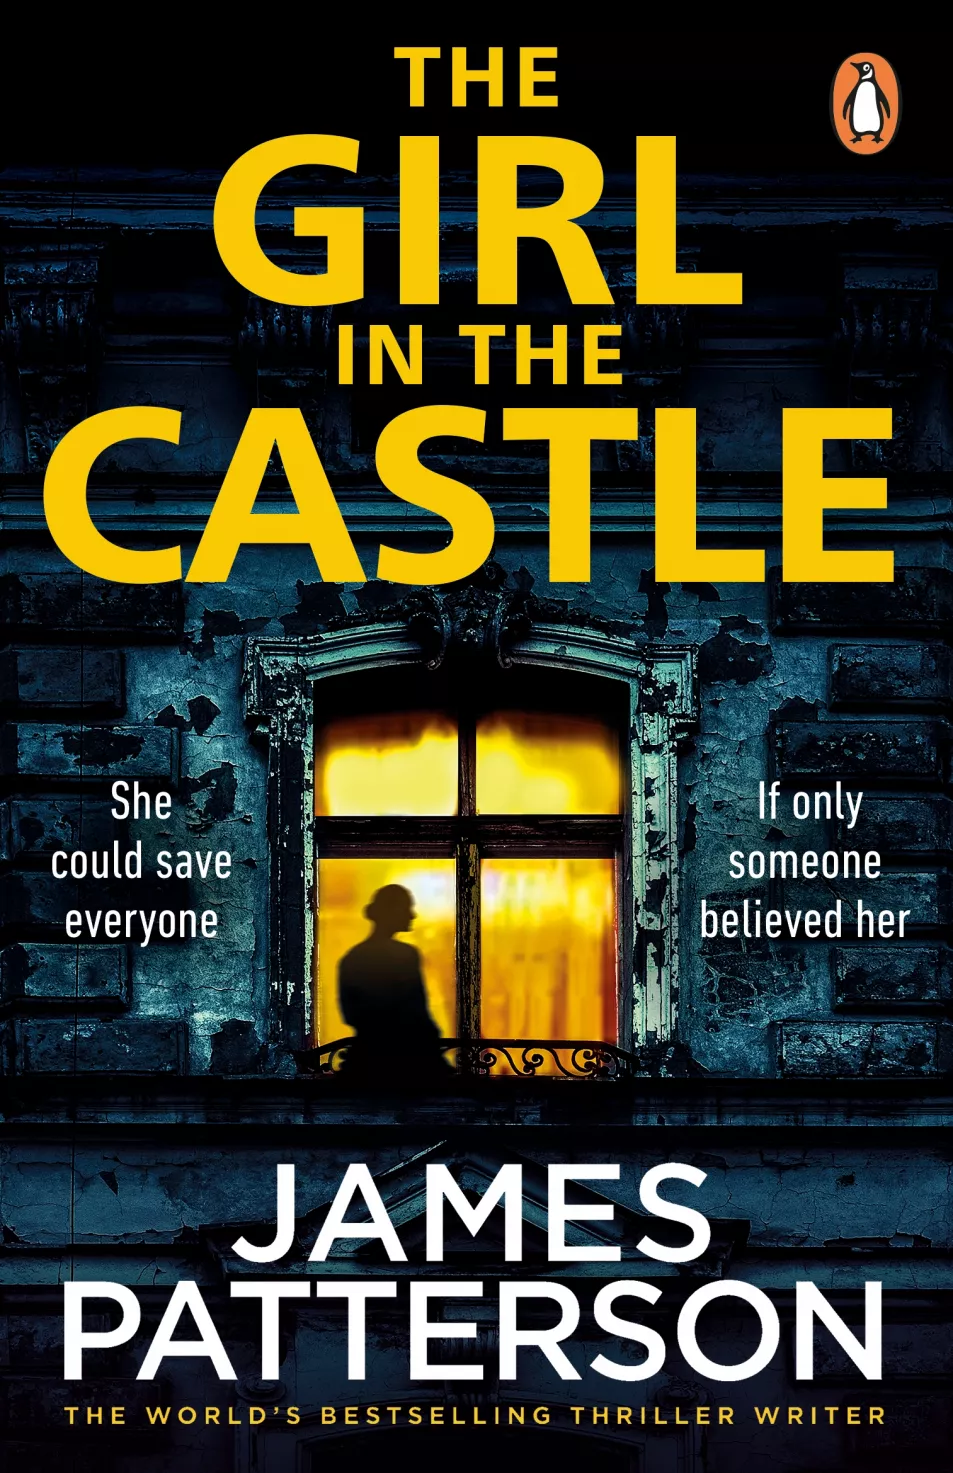 The Girl In The Castle by James Patterson